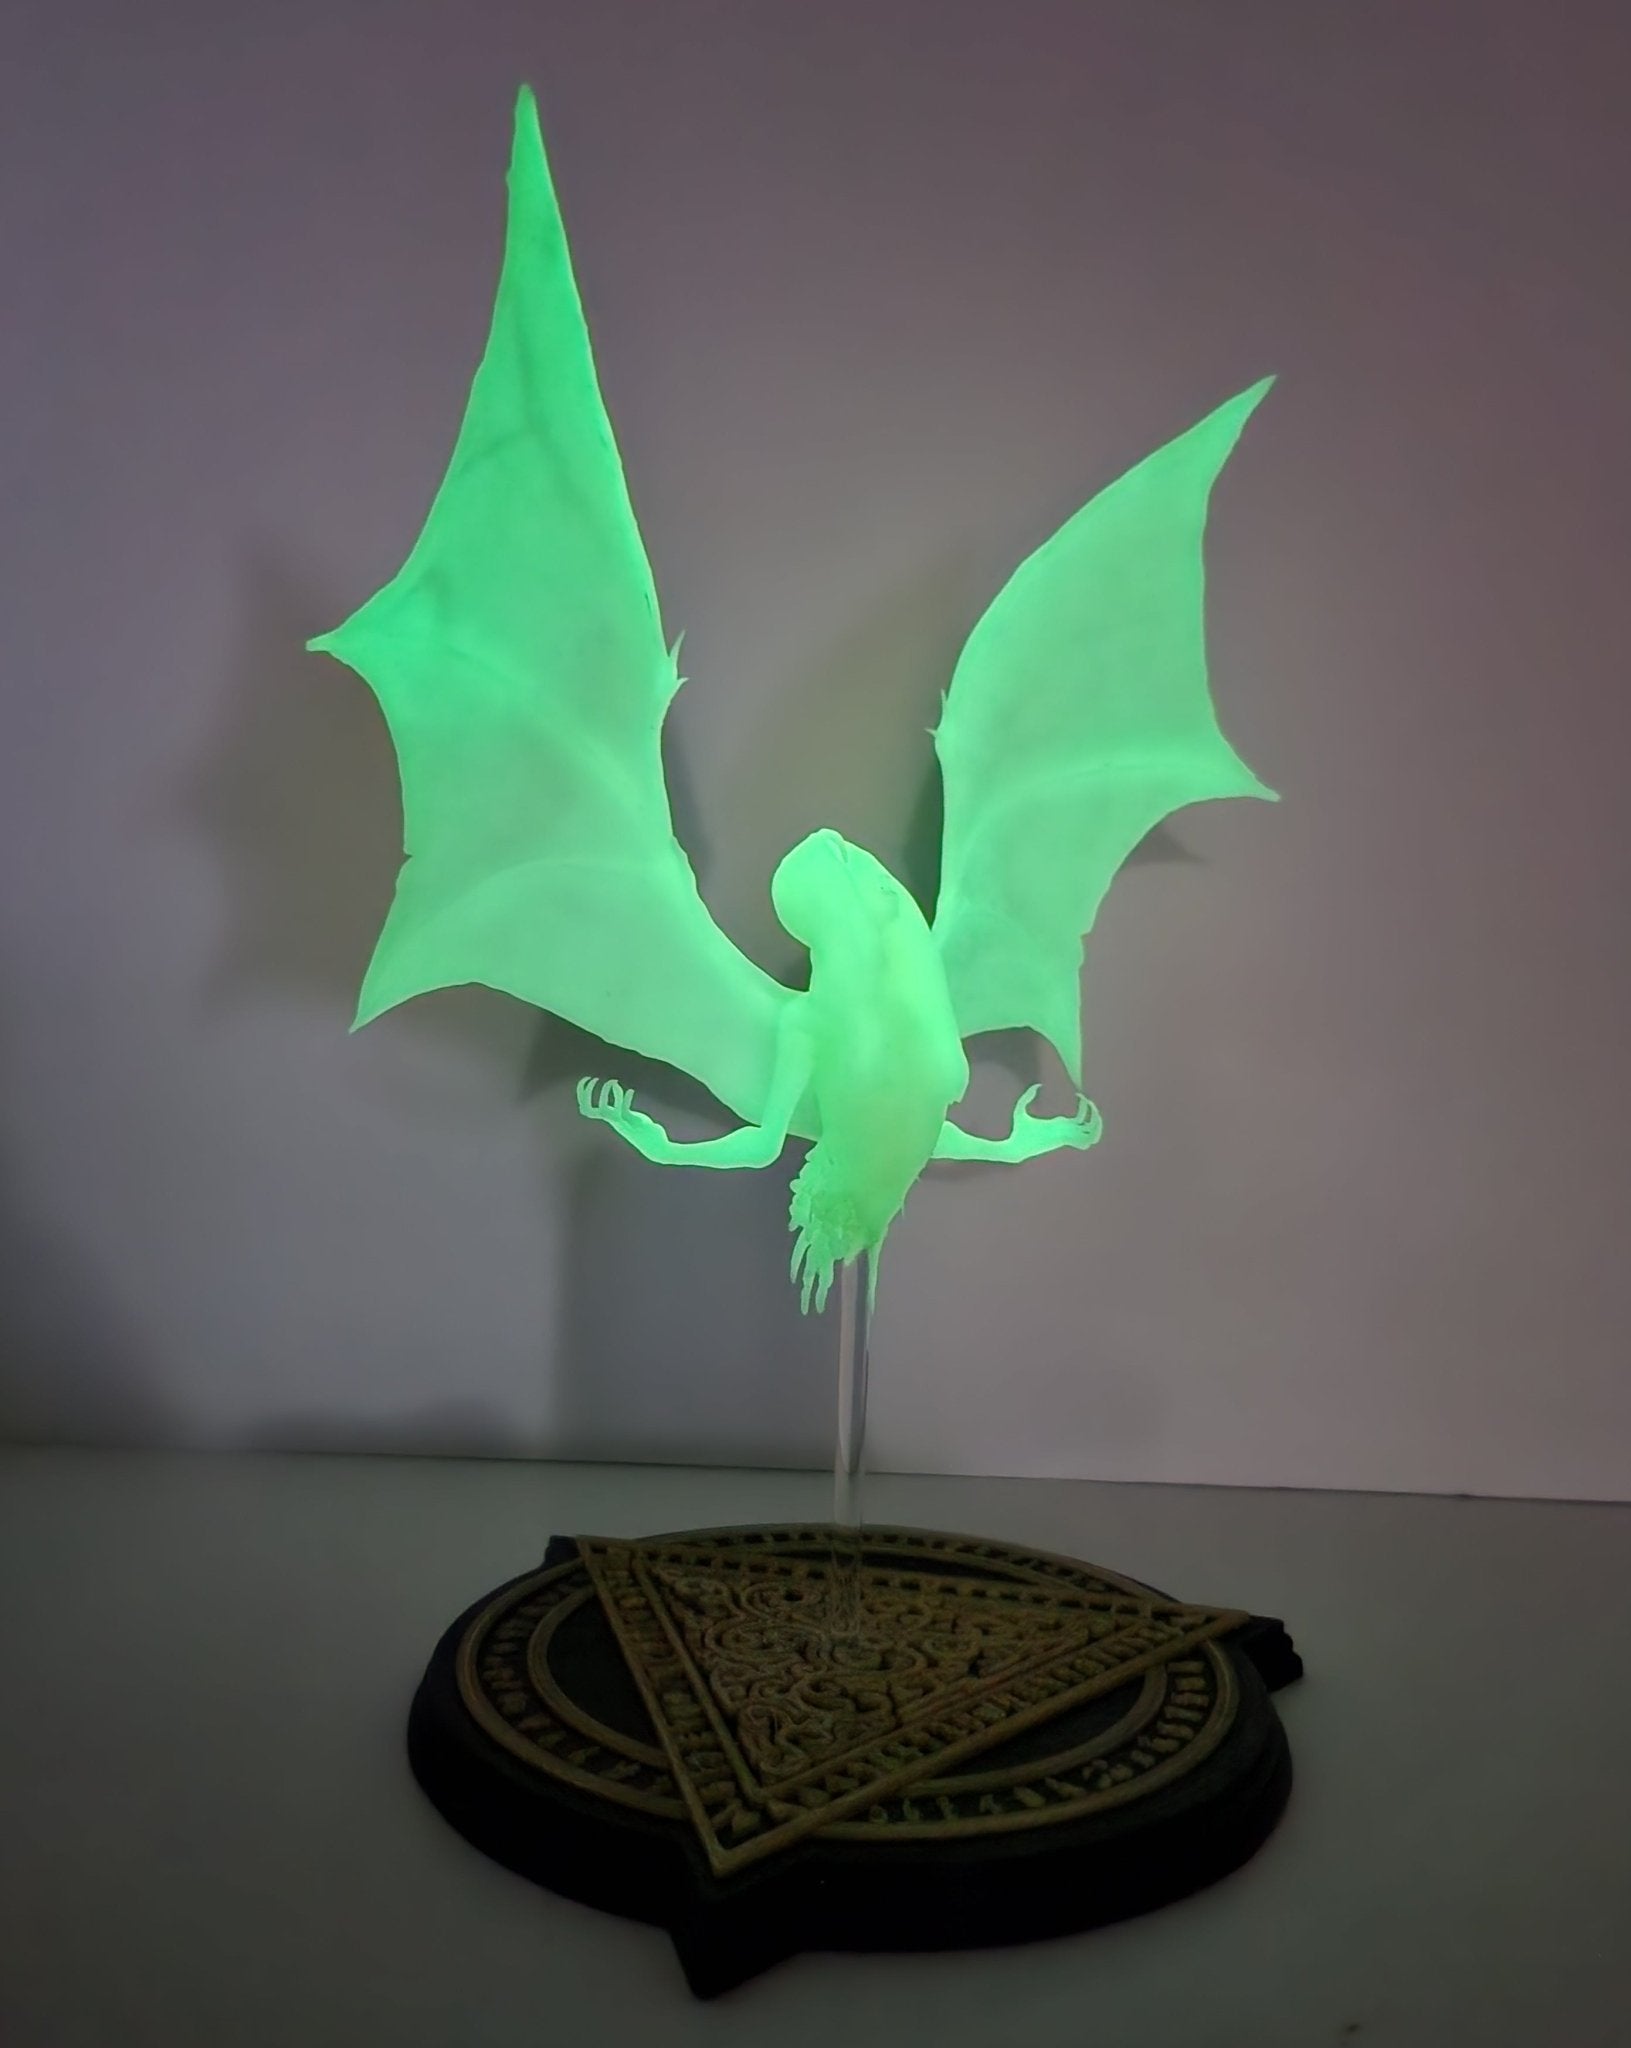 Descend into Darkness with The Baby-Eater: 3D Printed Glow-in-the-Dark Manananggal - Spectral Ink Shop - Figurine -